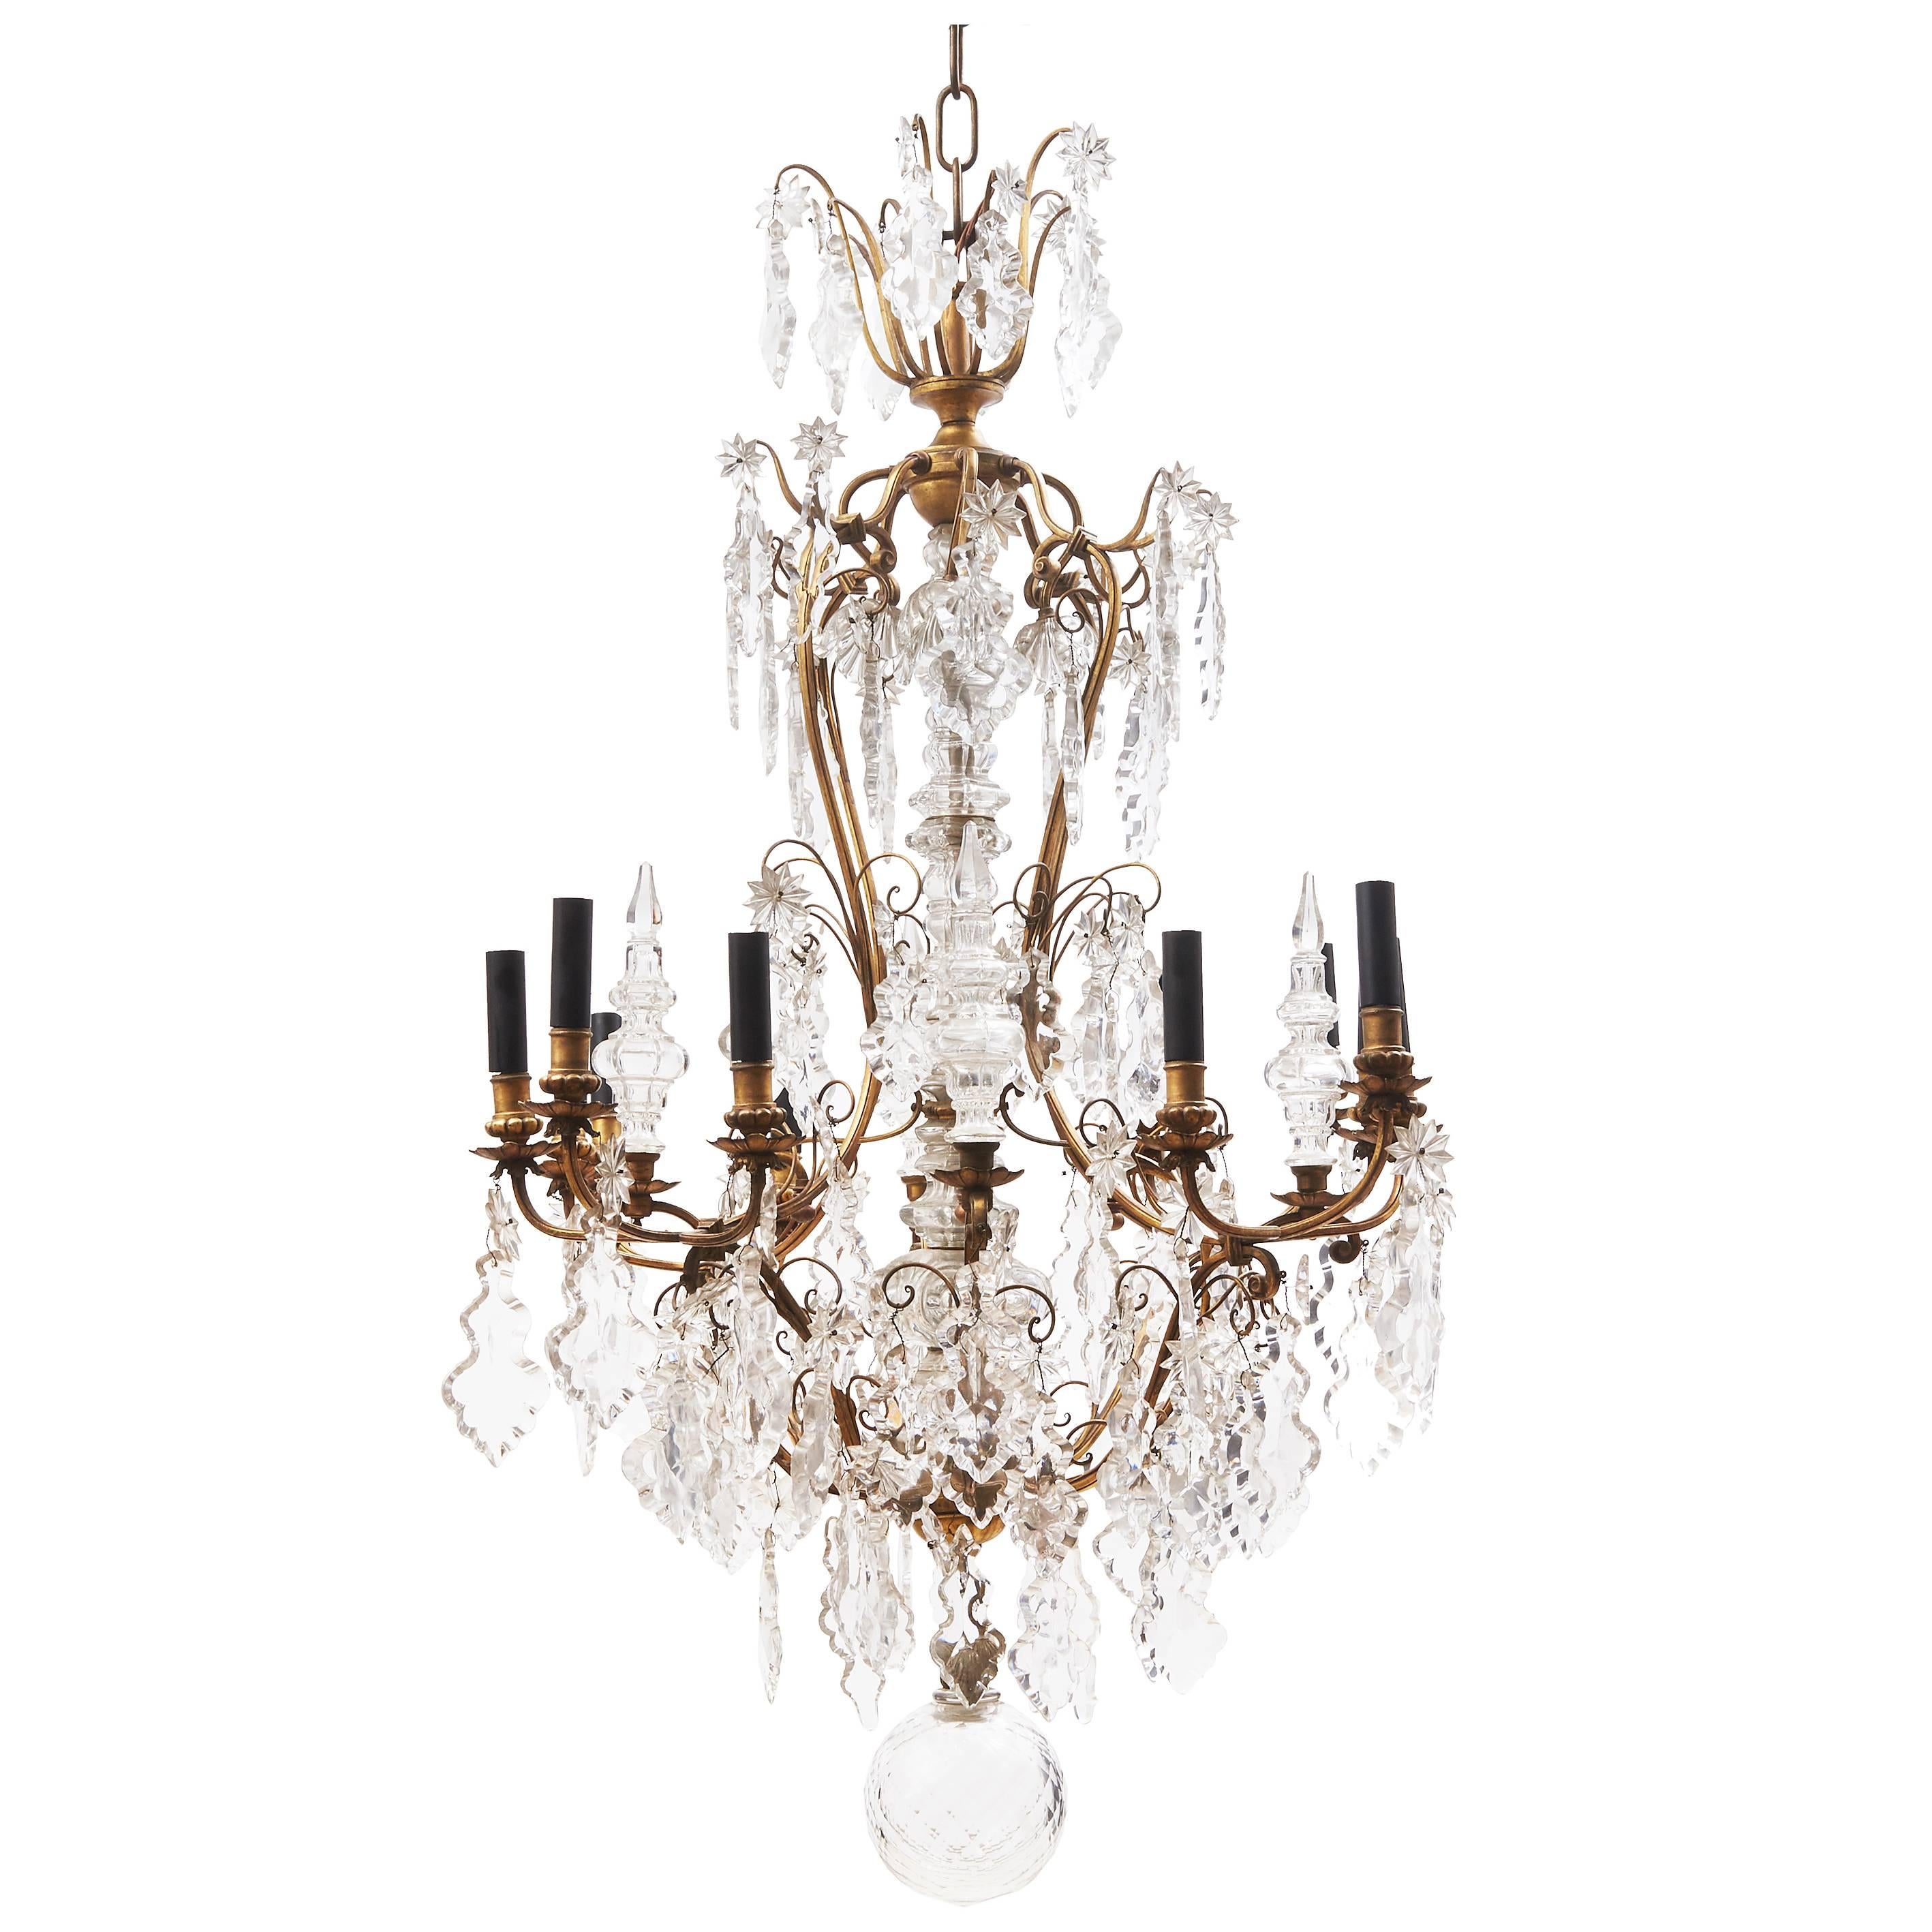 French Louis Philippe Twelve-Arm Gilt Bronze and Crystal Chandelier, circa 1850